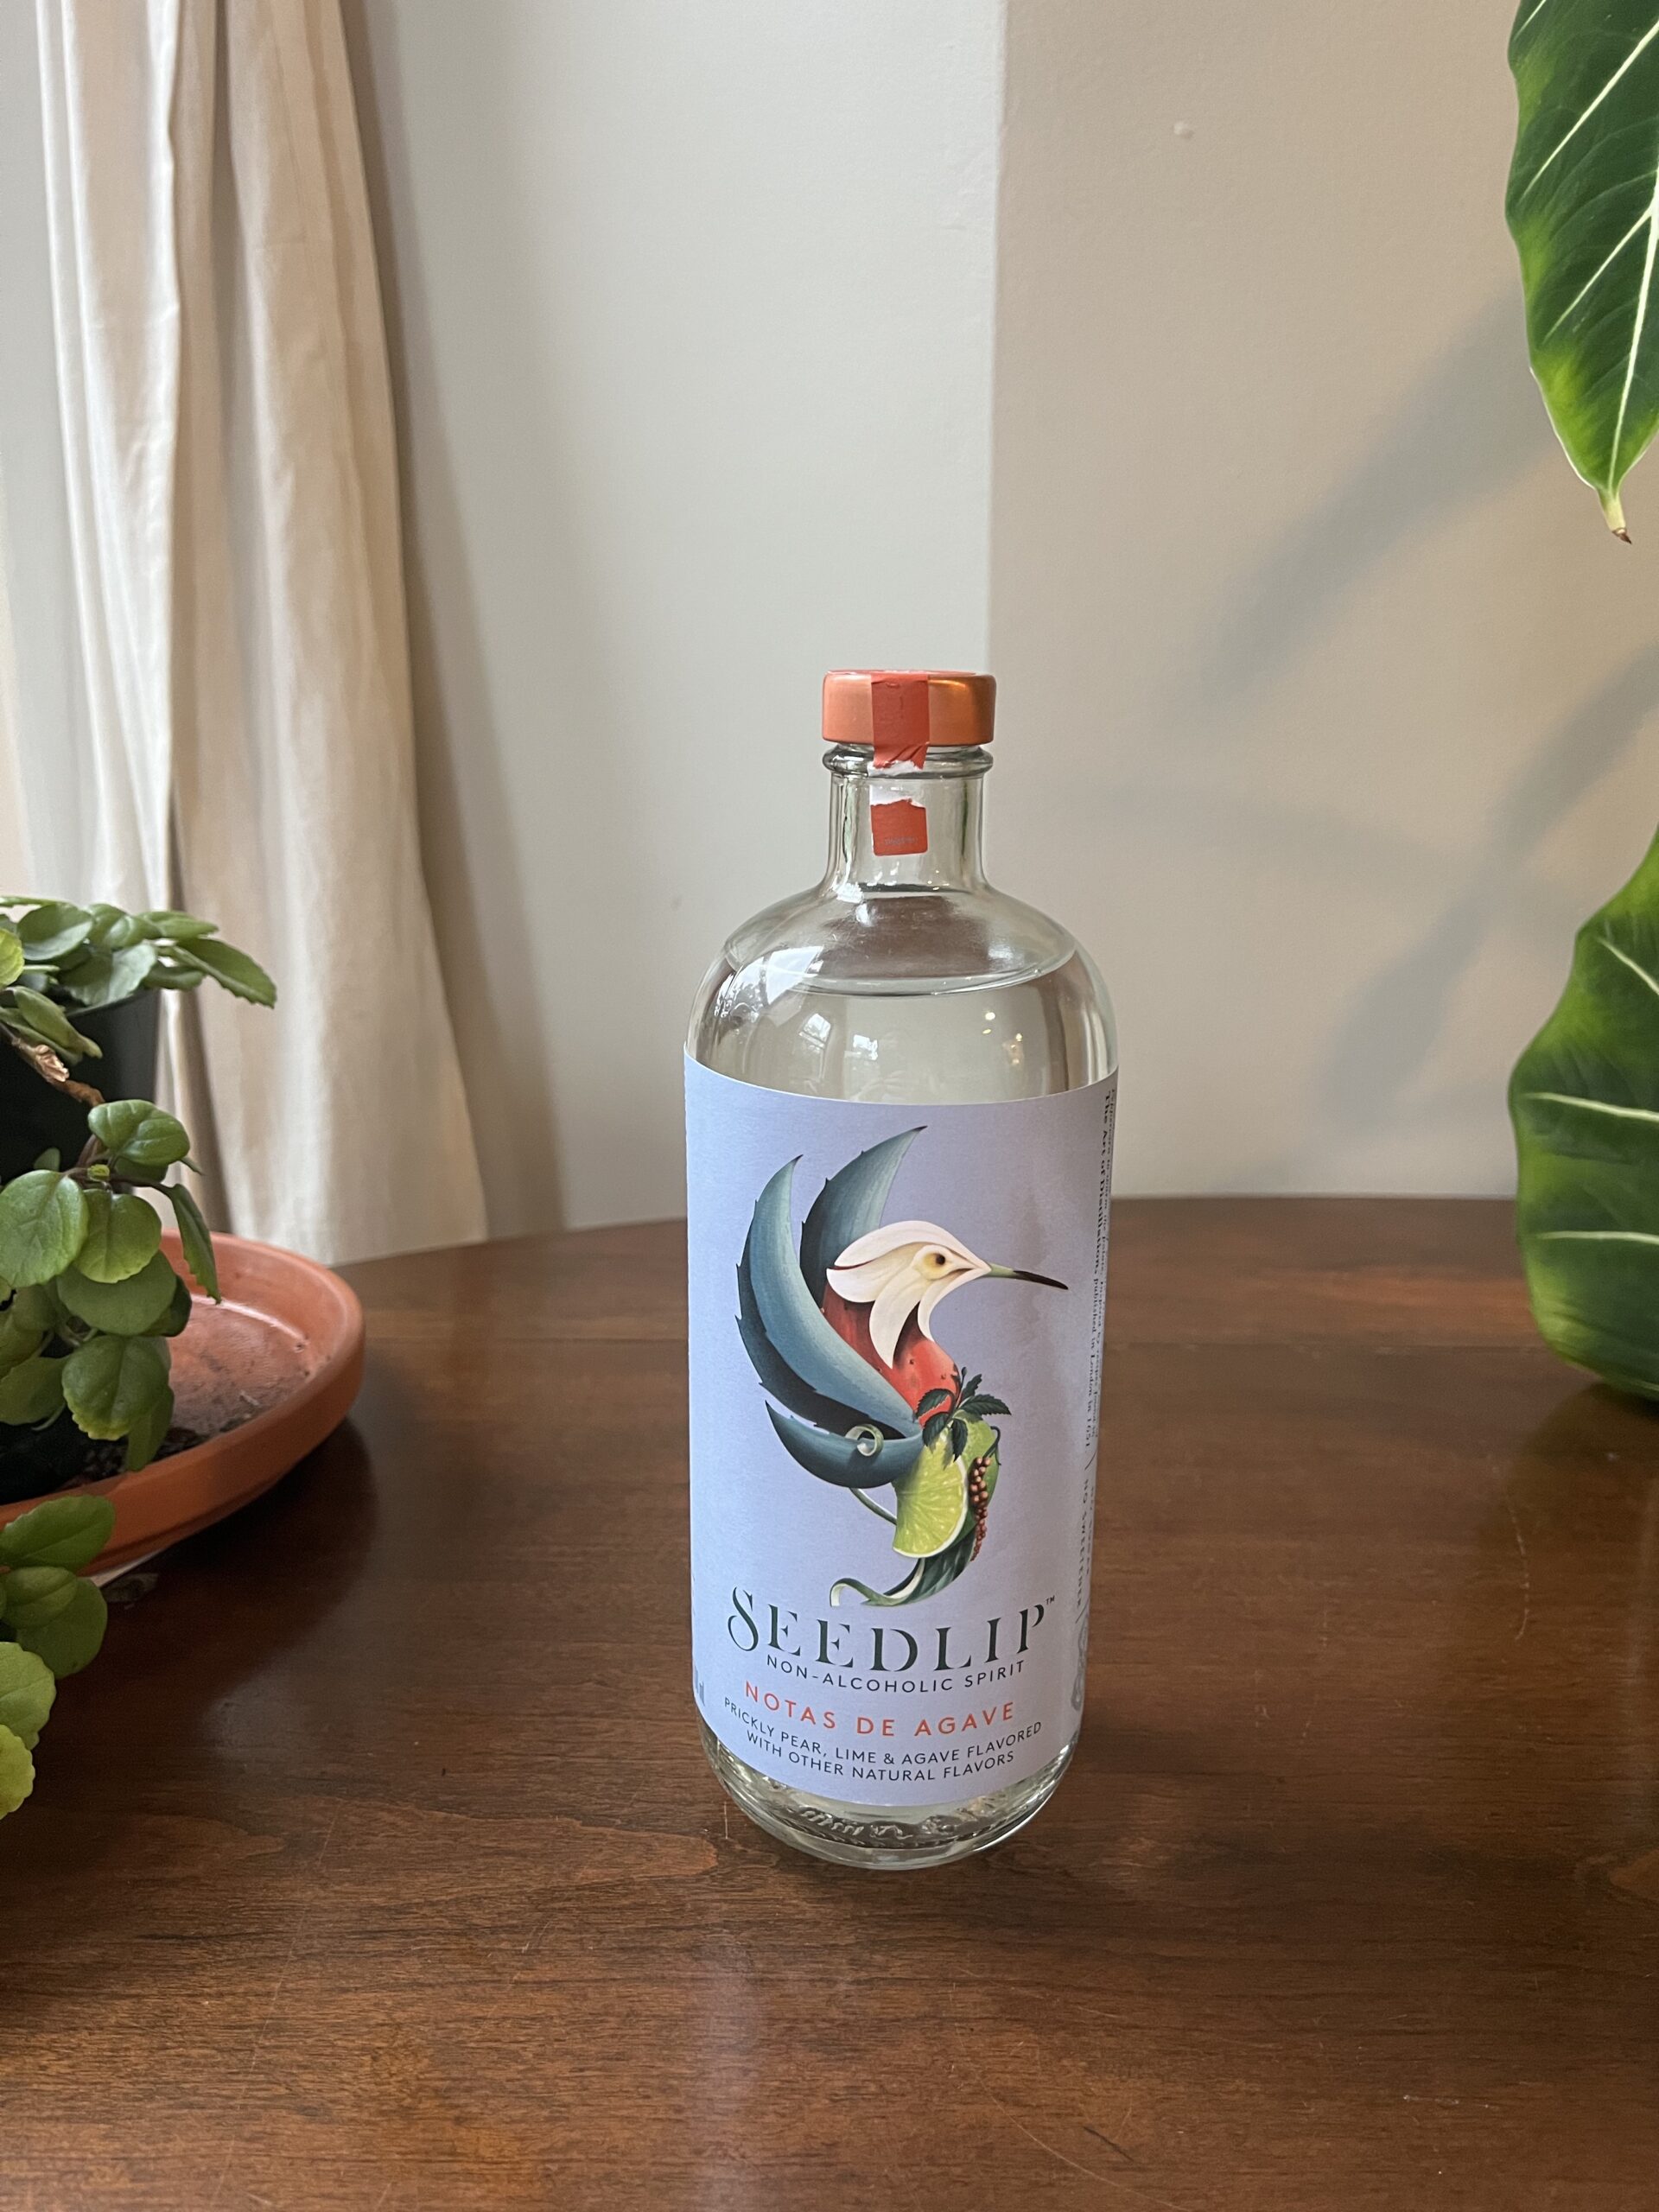 A bottle of Seedlip non-alcoholic spirit with a floral and bird design label sits on a wooden surface next to some houseplants.